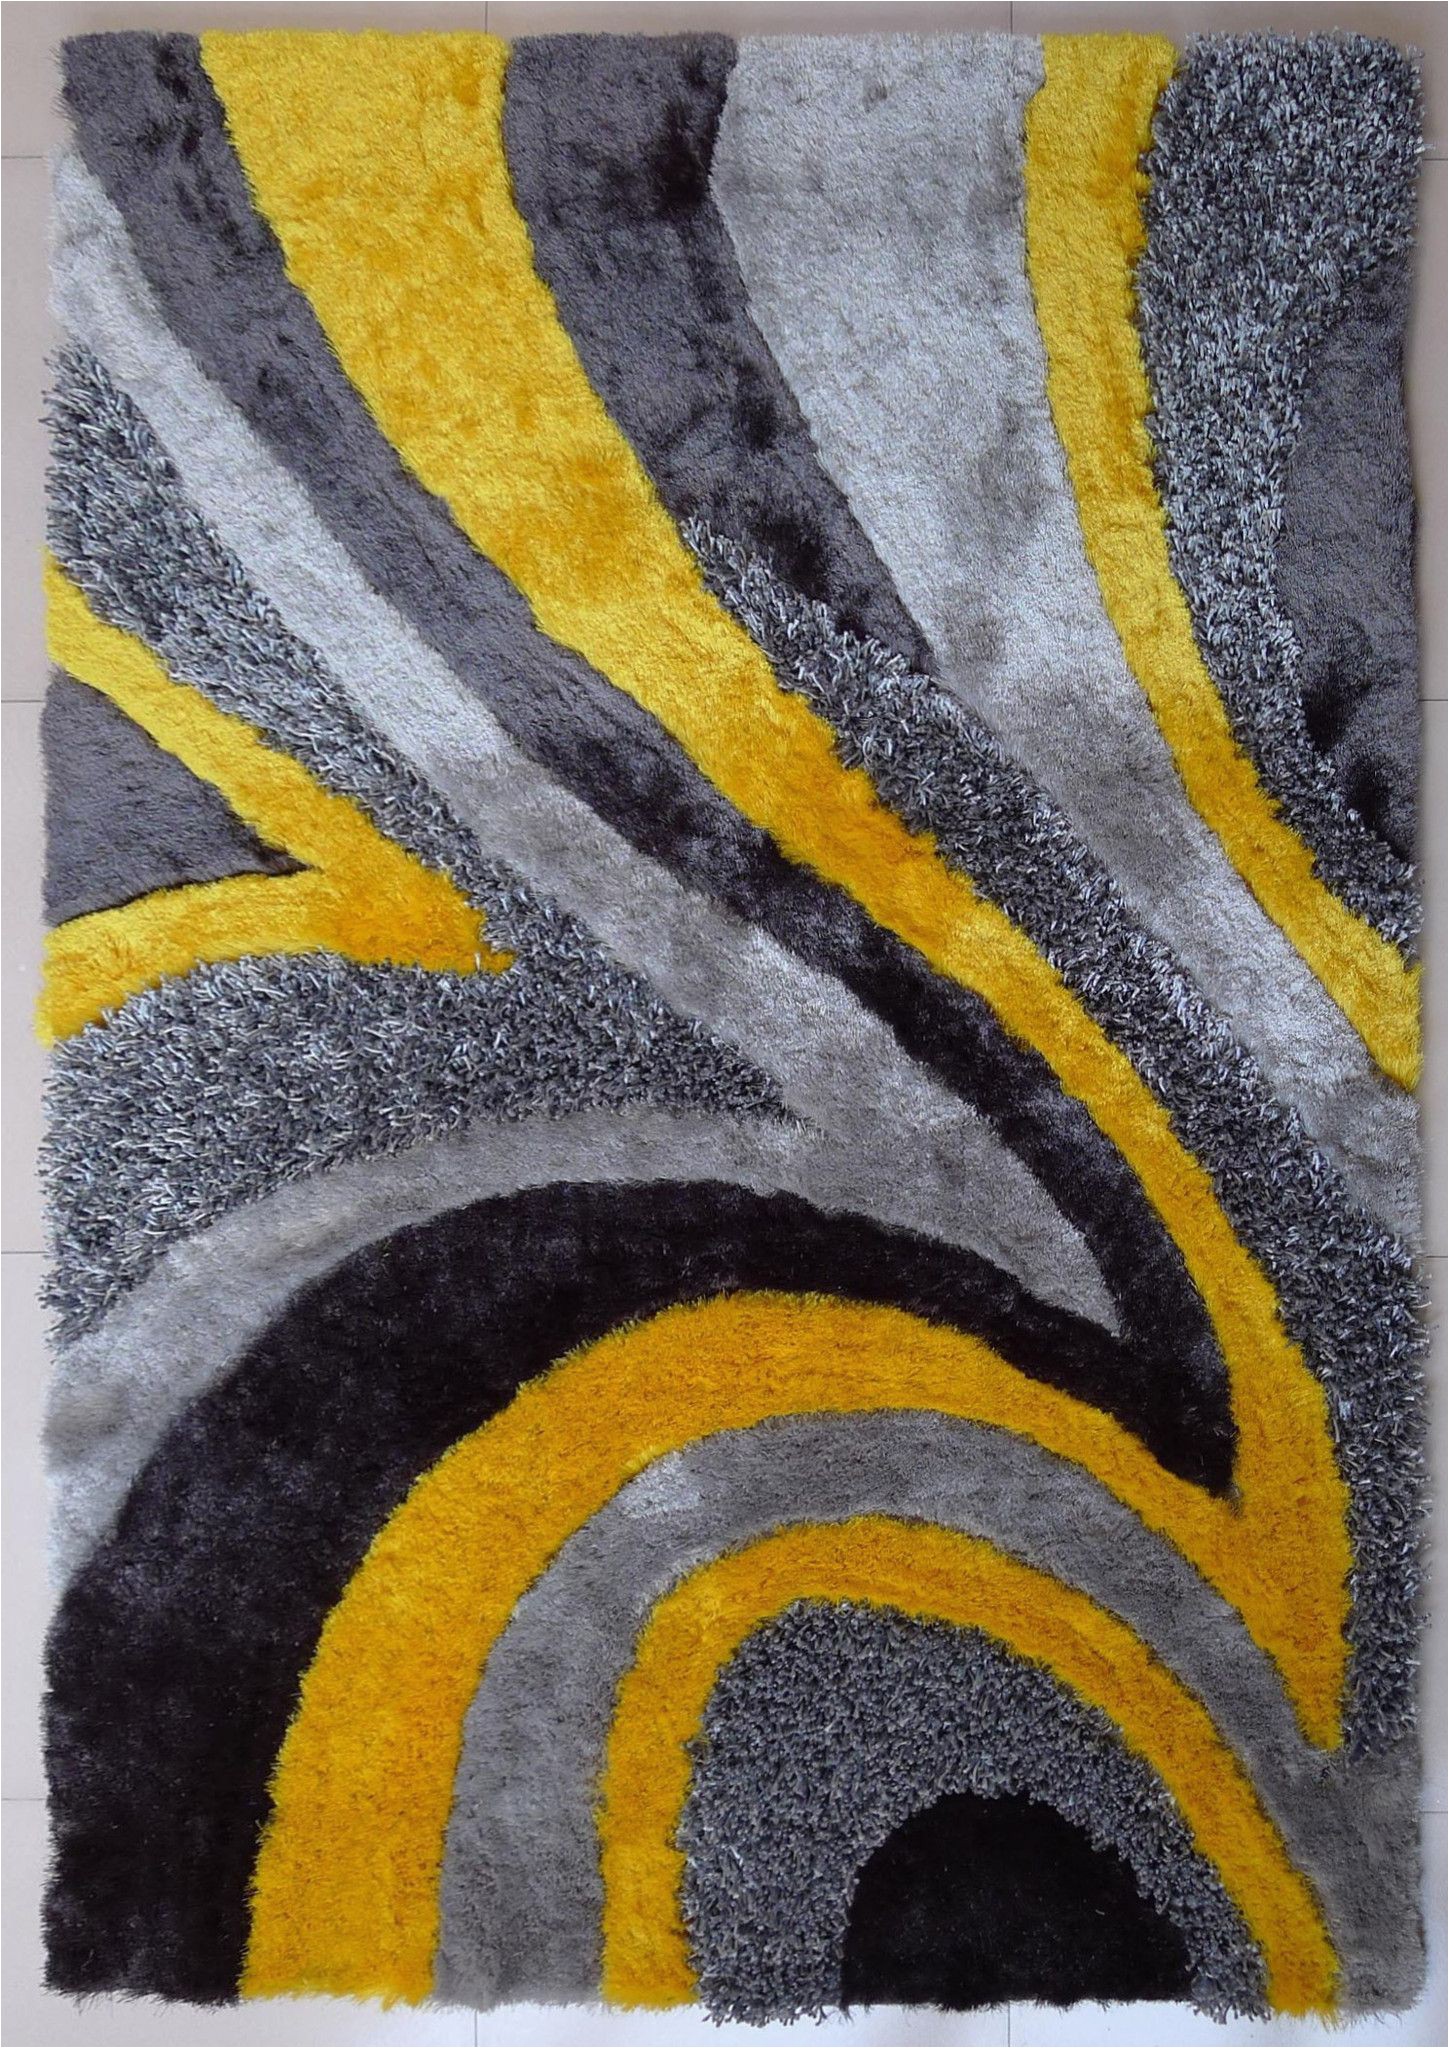 Mustard Yellow and Gray area Rug Contemporary Designer Shag area Rugs are Made with the